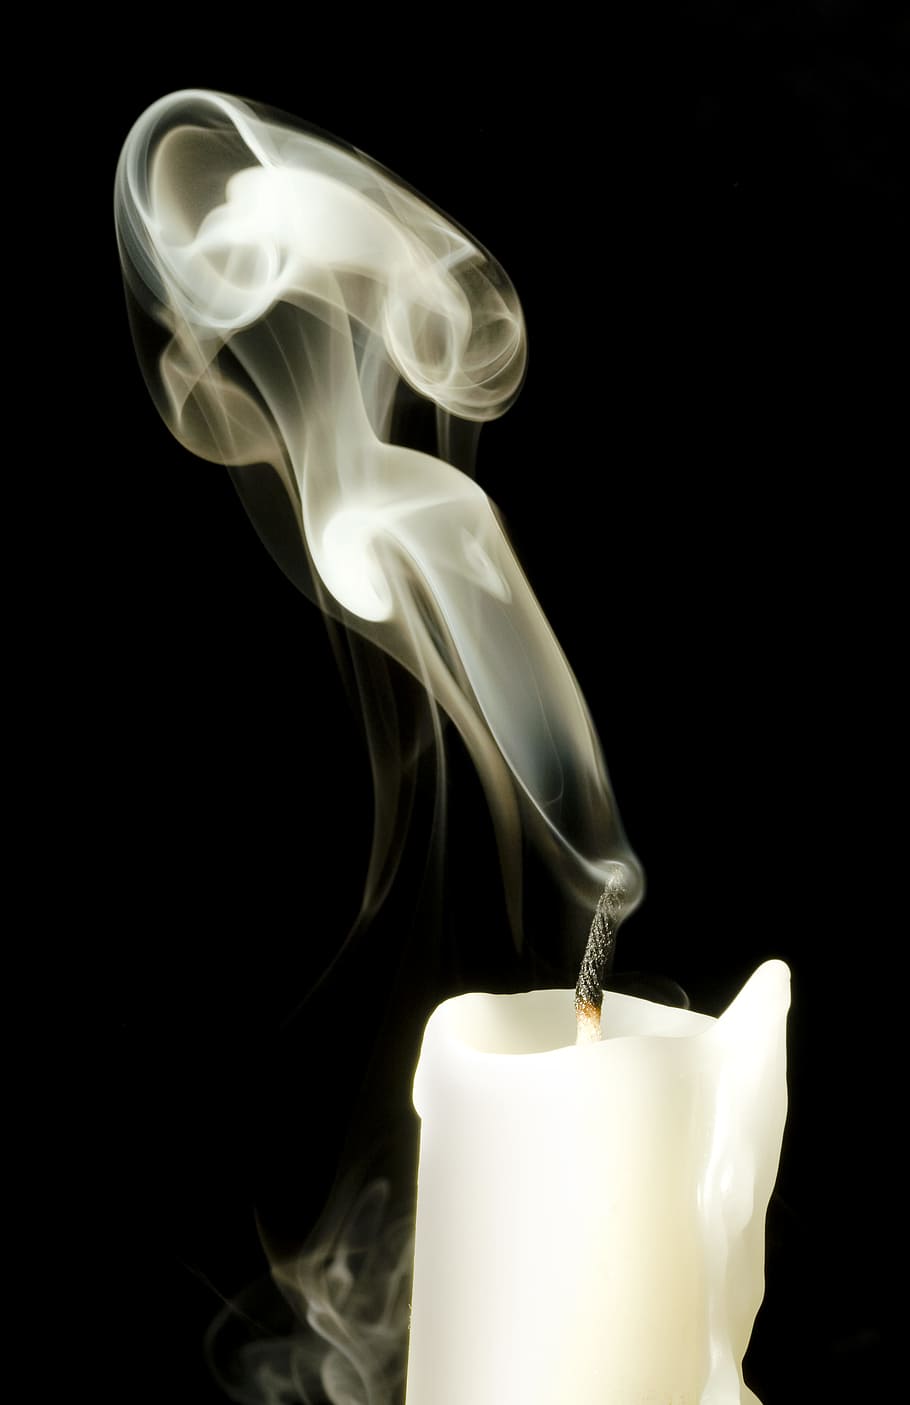 The extinguished candle.  